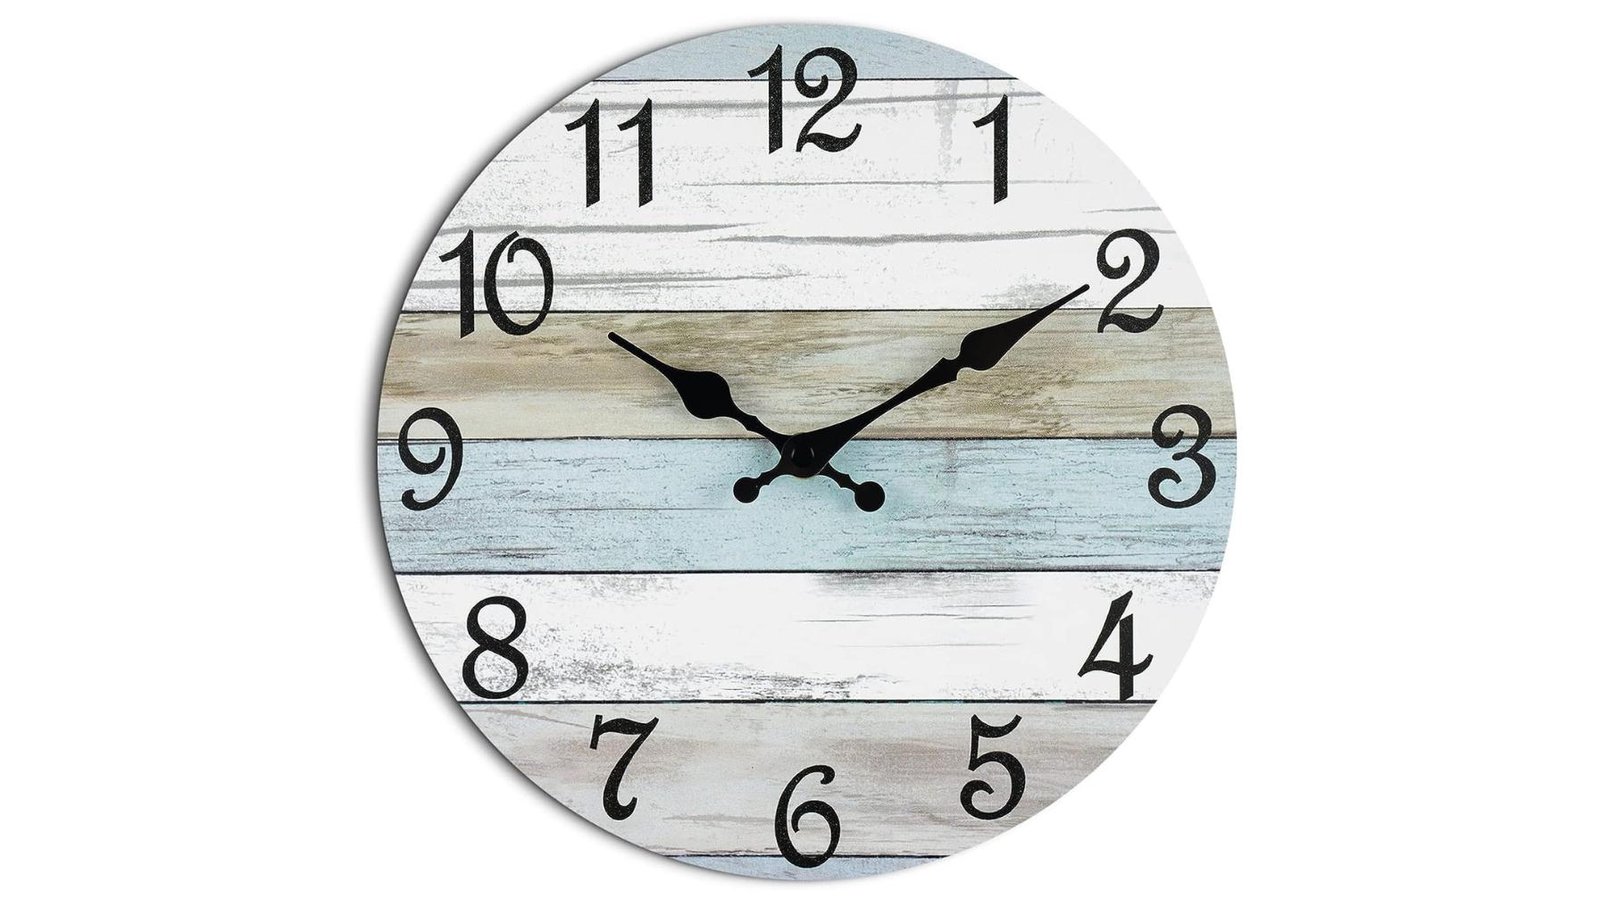 CHYLIN Rustic Coastal Country Living Room Wall Clock Review